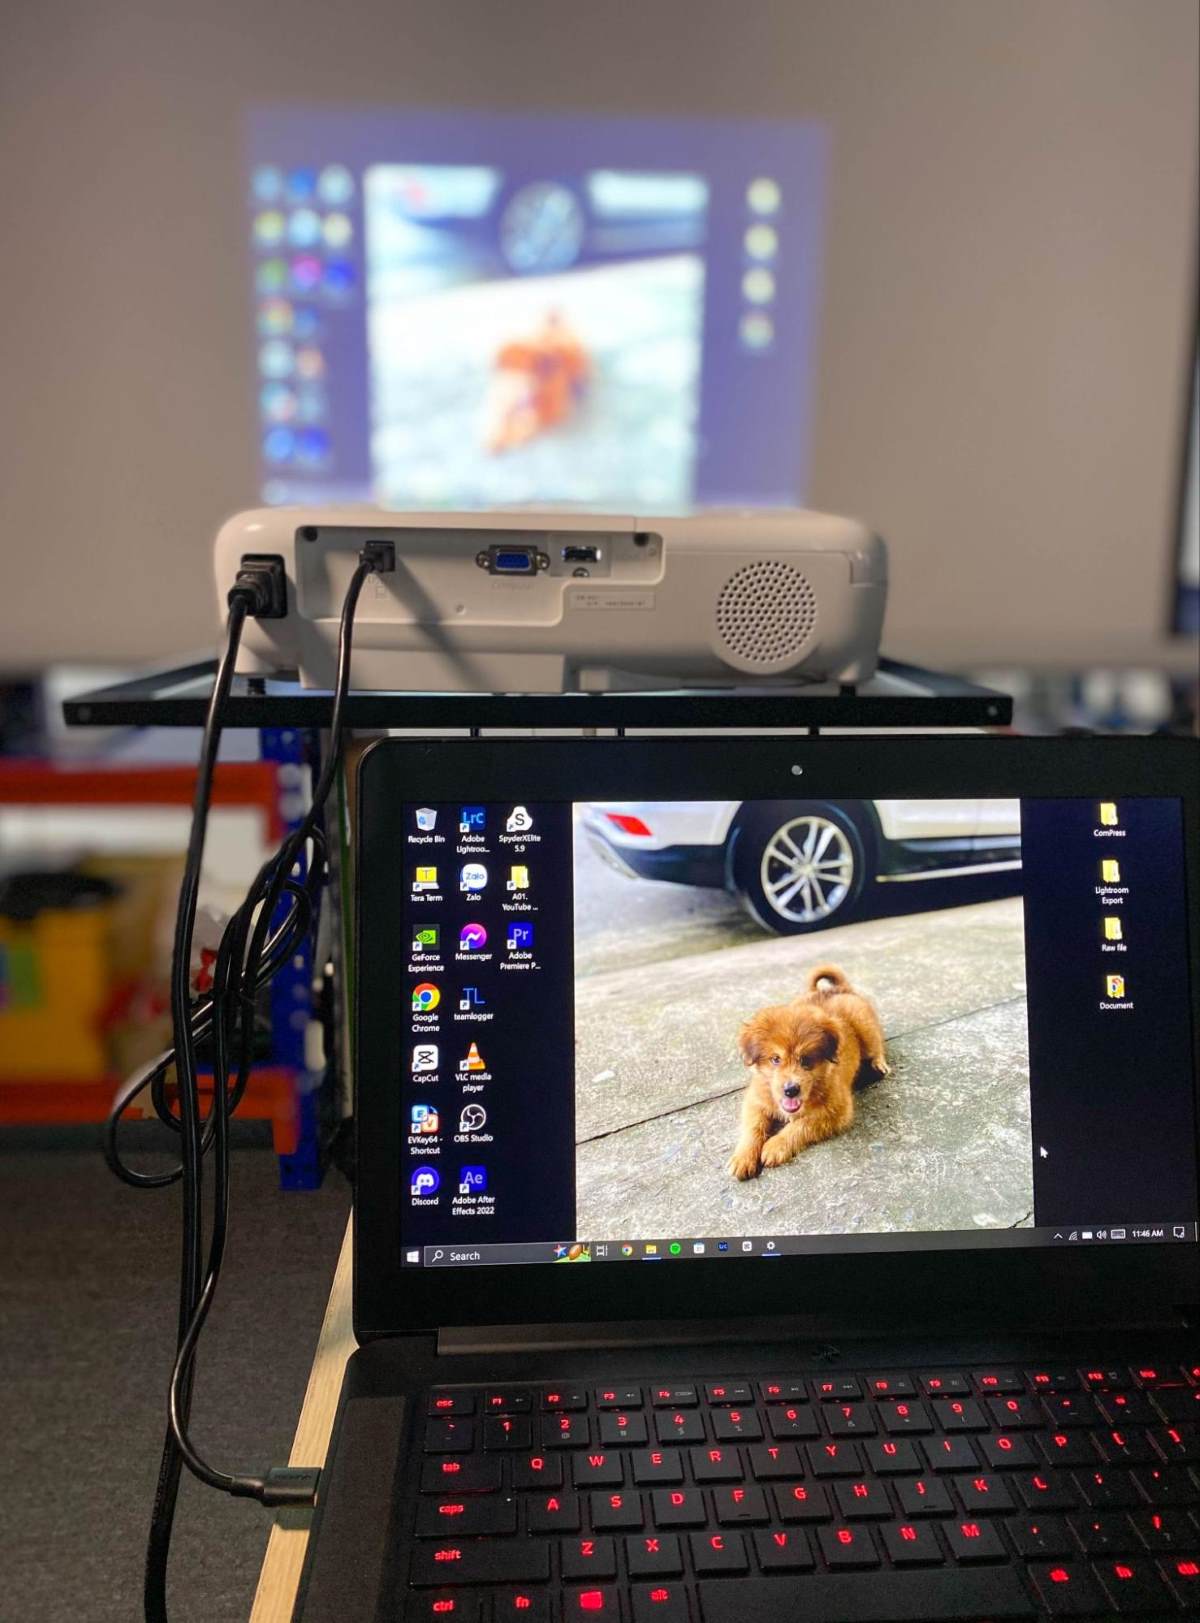 a Laptop connected to an Epson projector via a USB cable